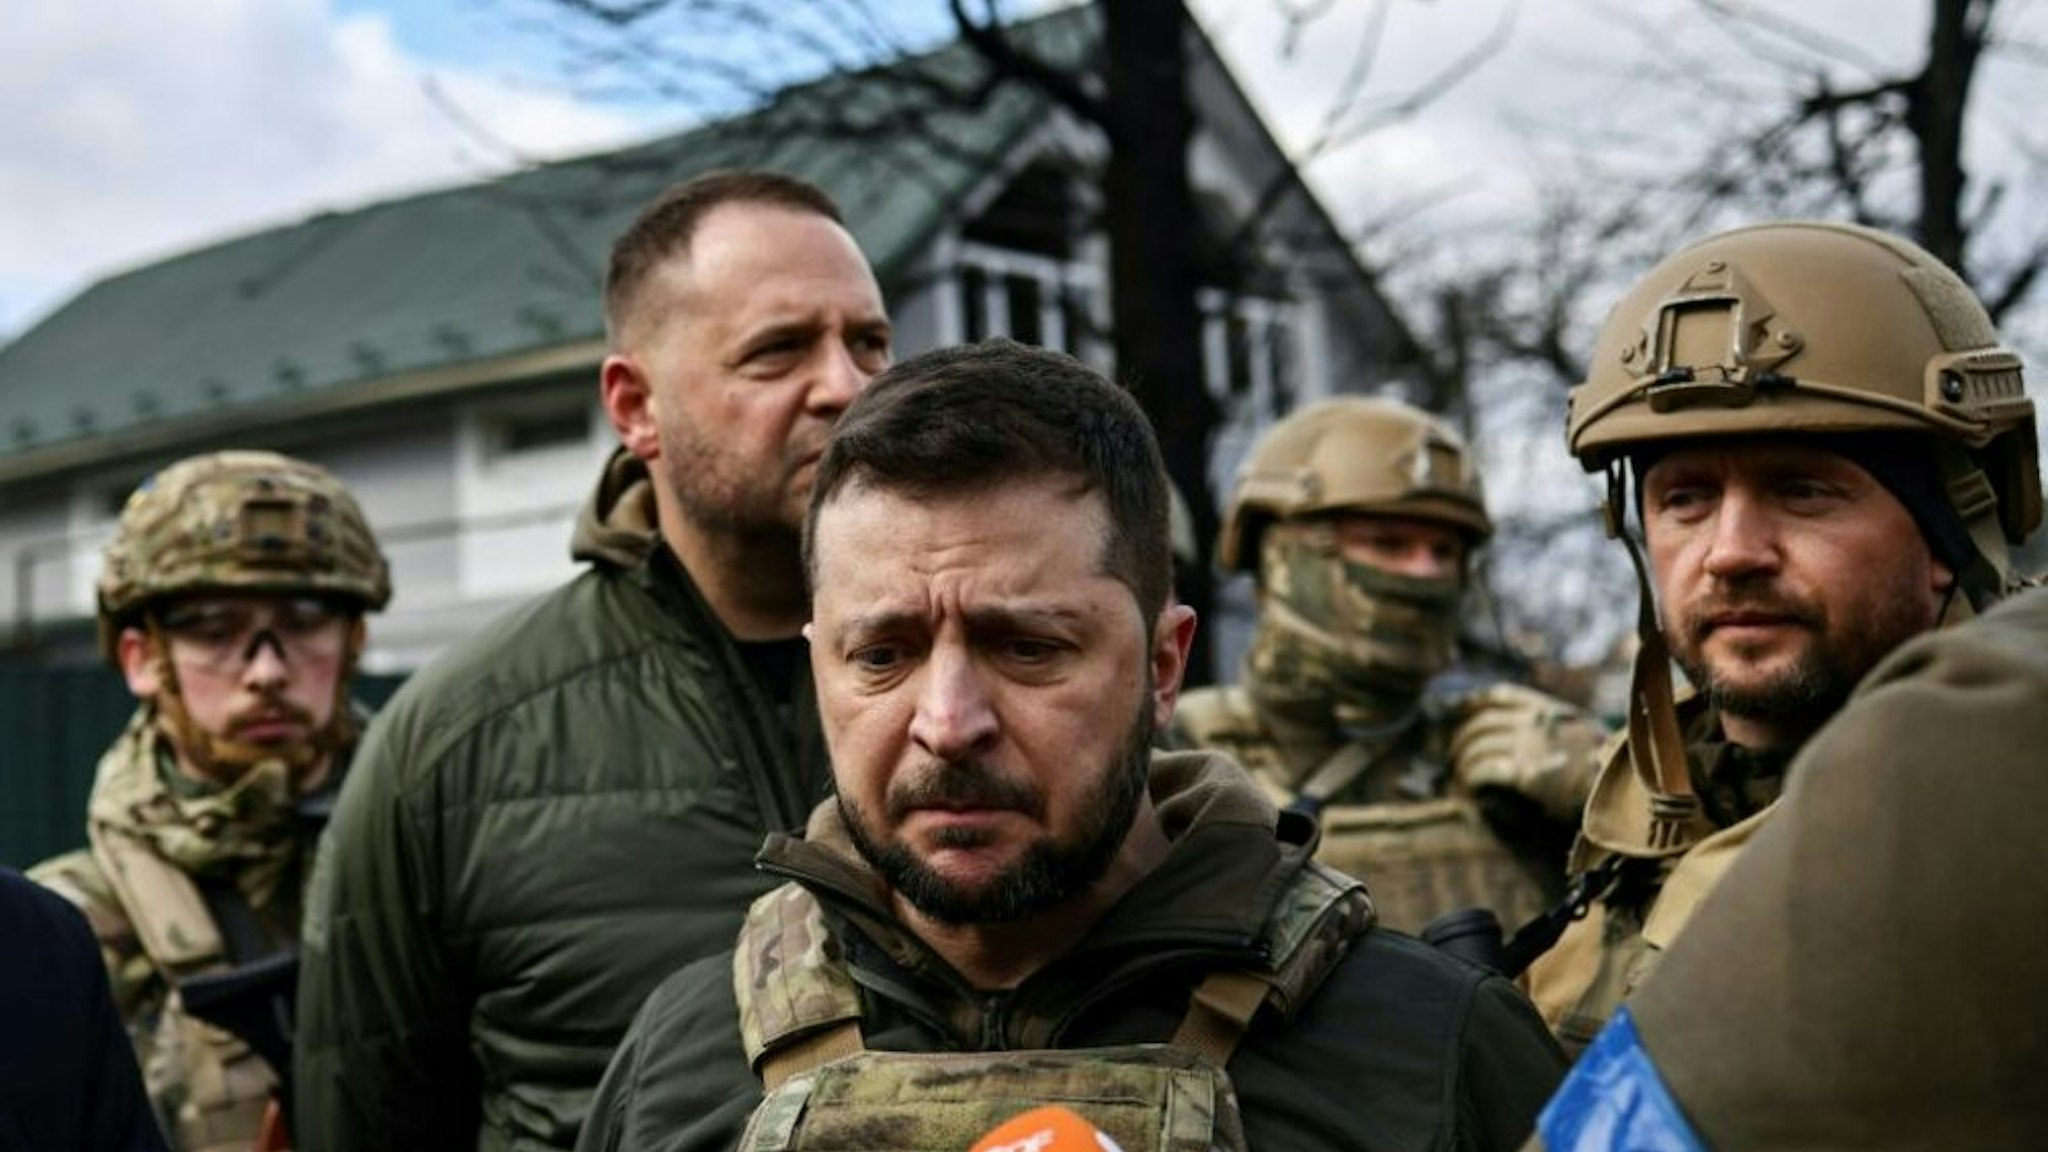 Ukrainian President Volodymyr Zelensky (C) speaks to the press in the town of Bucha, northwest of the Ukrainian capital Kyiv, on April 4, 2022. - Ukraine's President Volodymyr Zelensky said on April 3, 2022 the Russian leadership was responsible for civilian killings in Bucha, outside Kyiv, where bodies were found lying in the street after the town was retaken by the Ukrainian army.